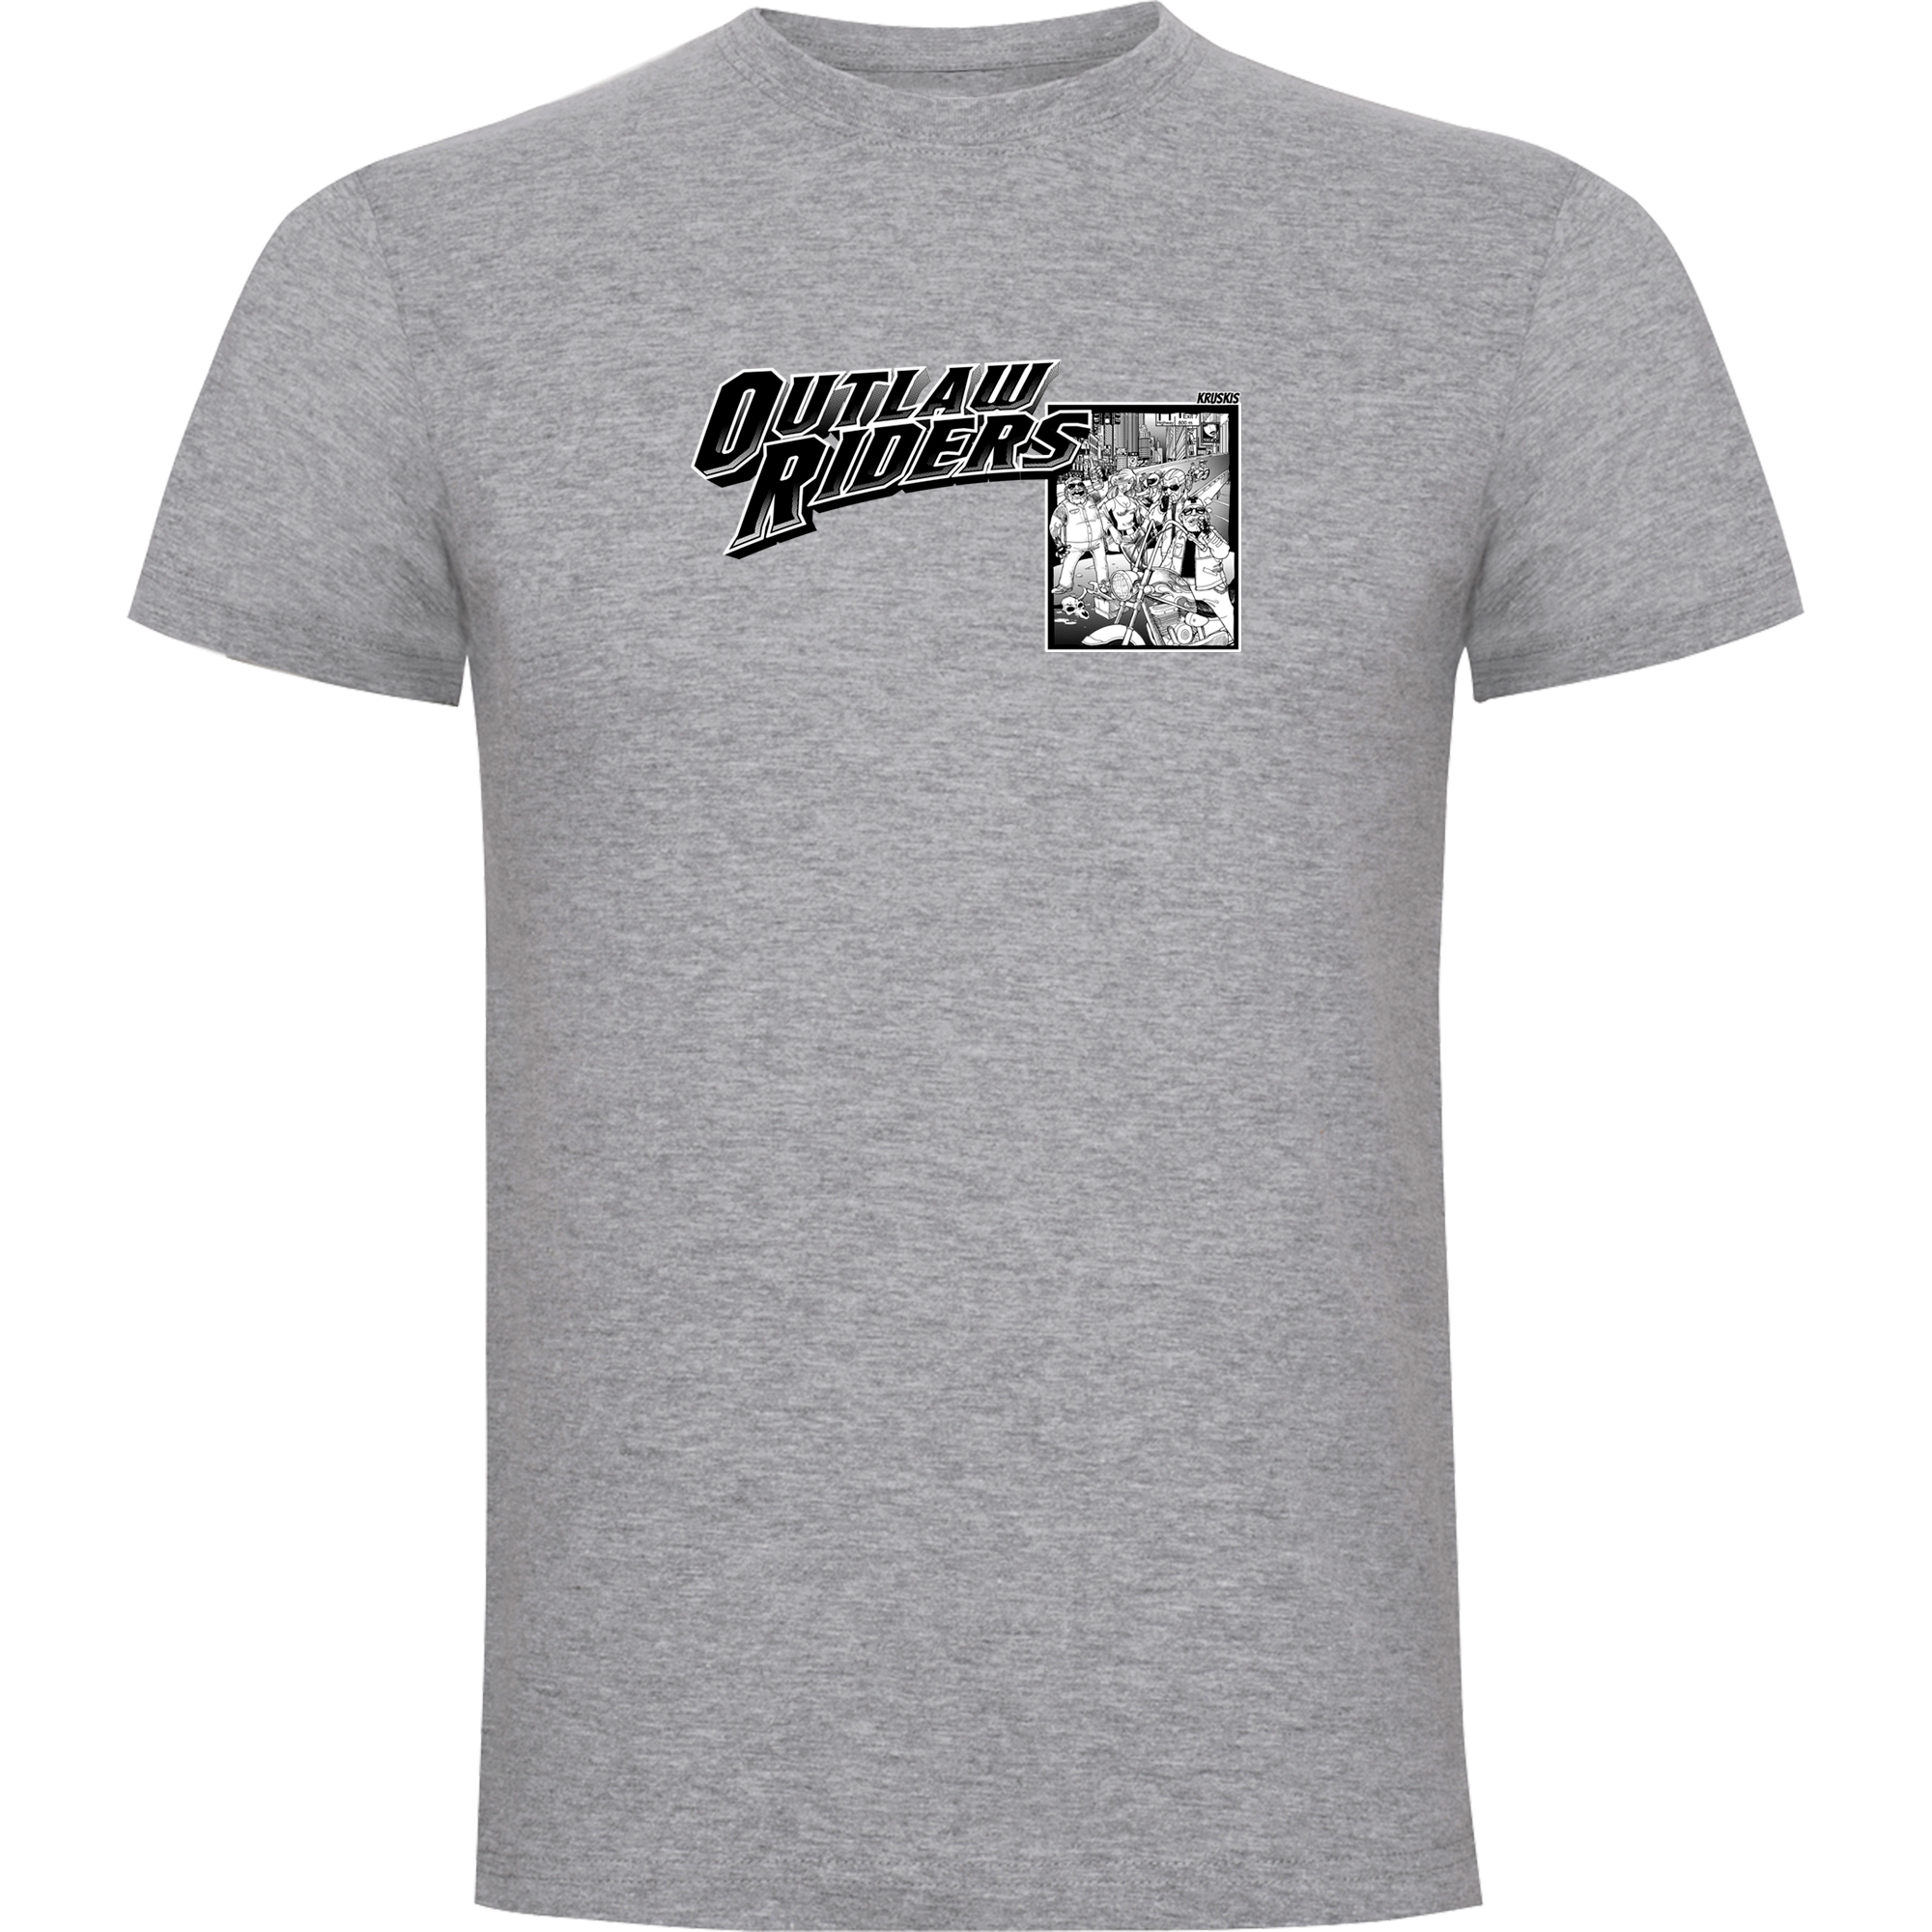 T Shirt Motorcycling Outlaw Riders Short Sleeves Man